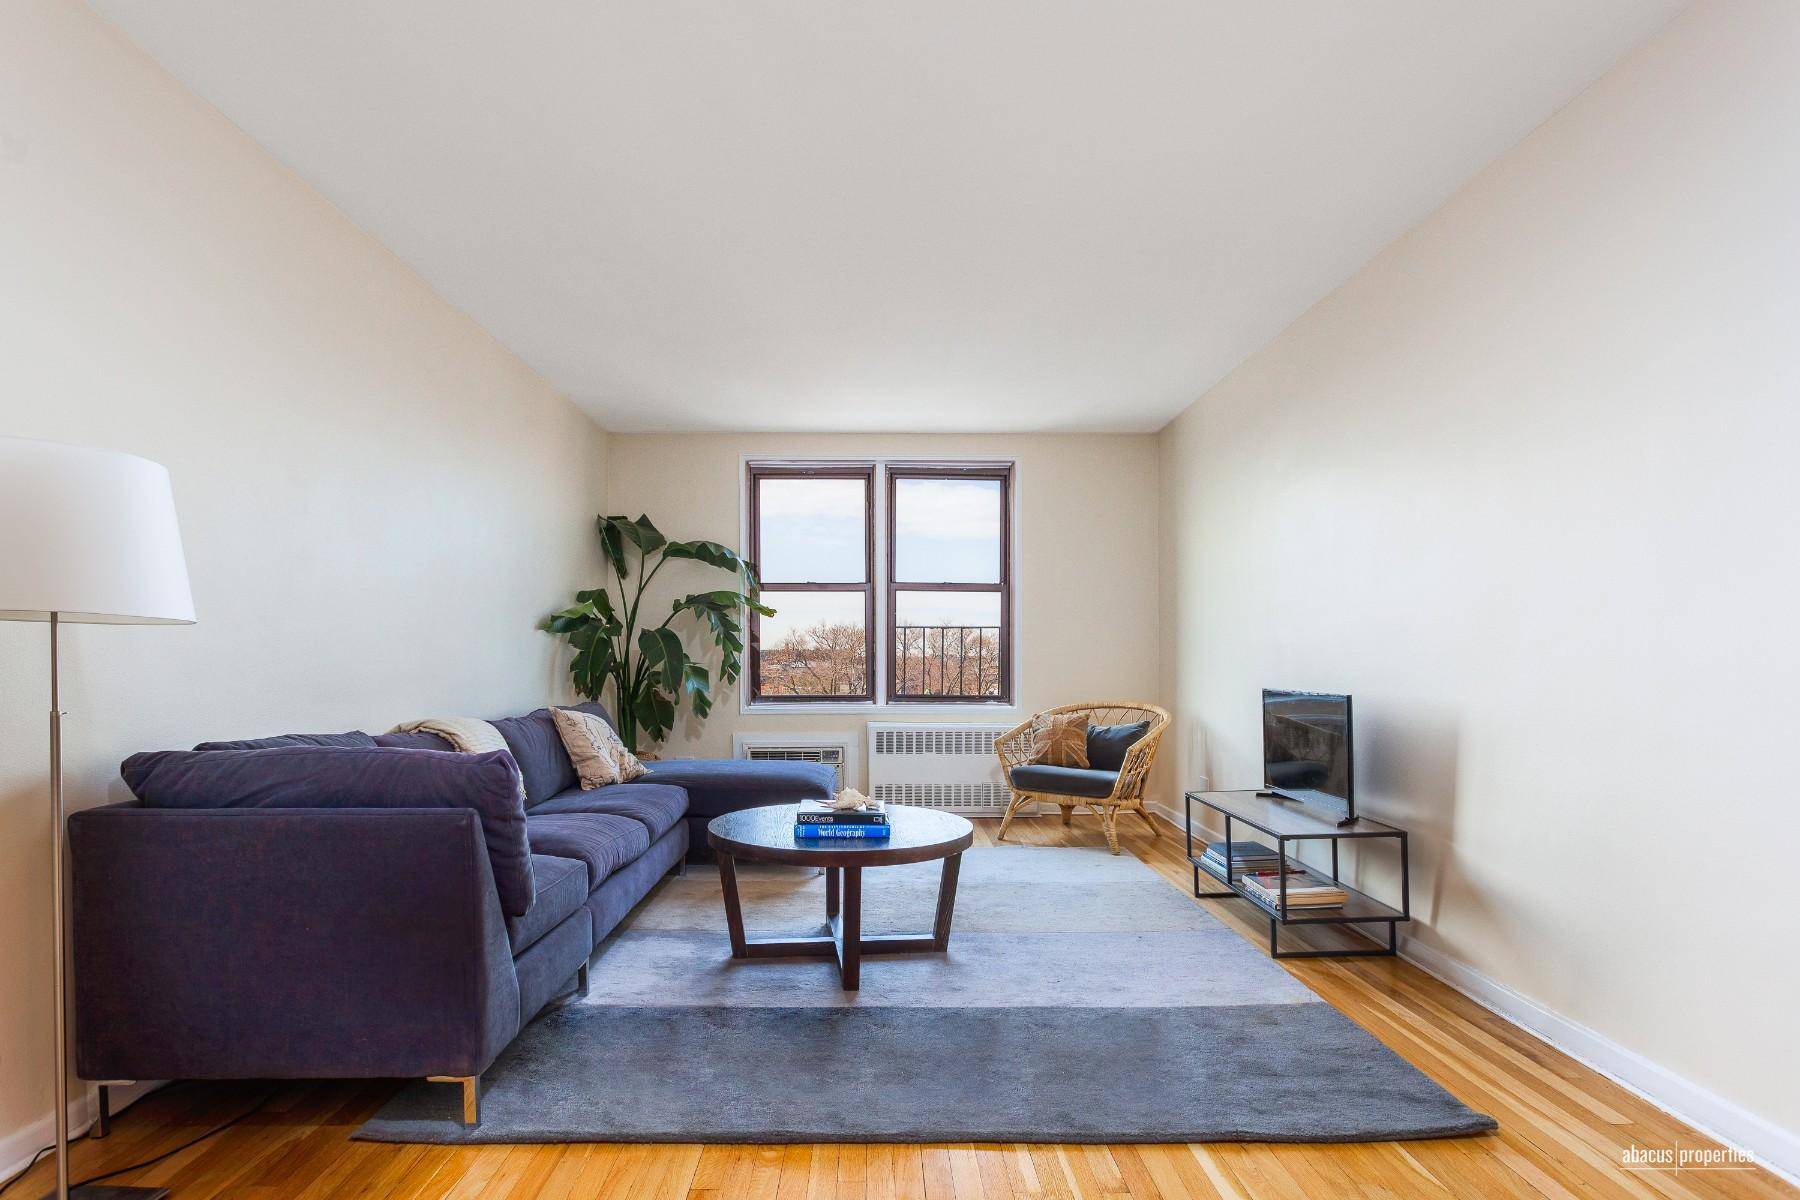 Perfectly perched upon the top floor of this well maintained elevator building, this very spacious 1 bedroom boasts 3 exposures flooded with natural light.